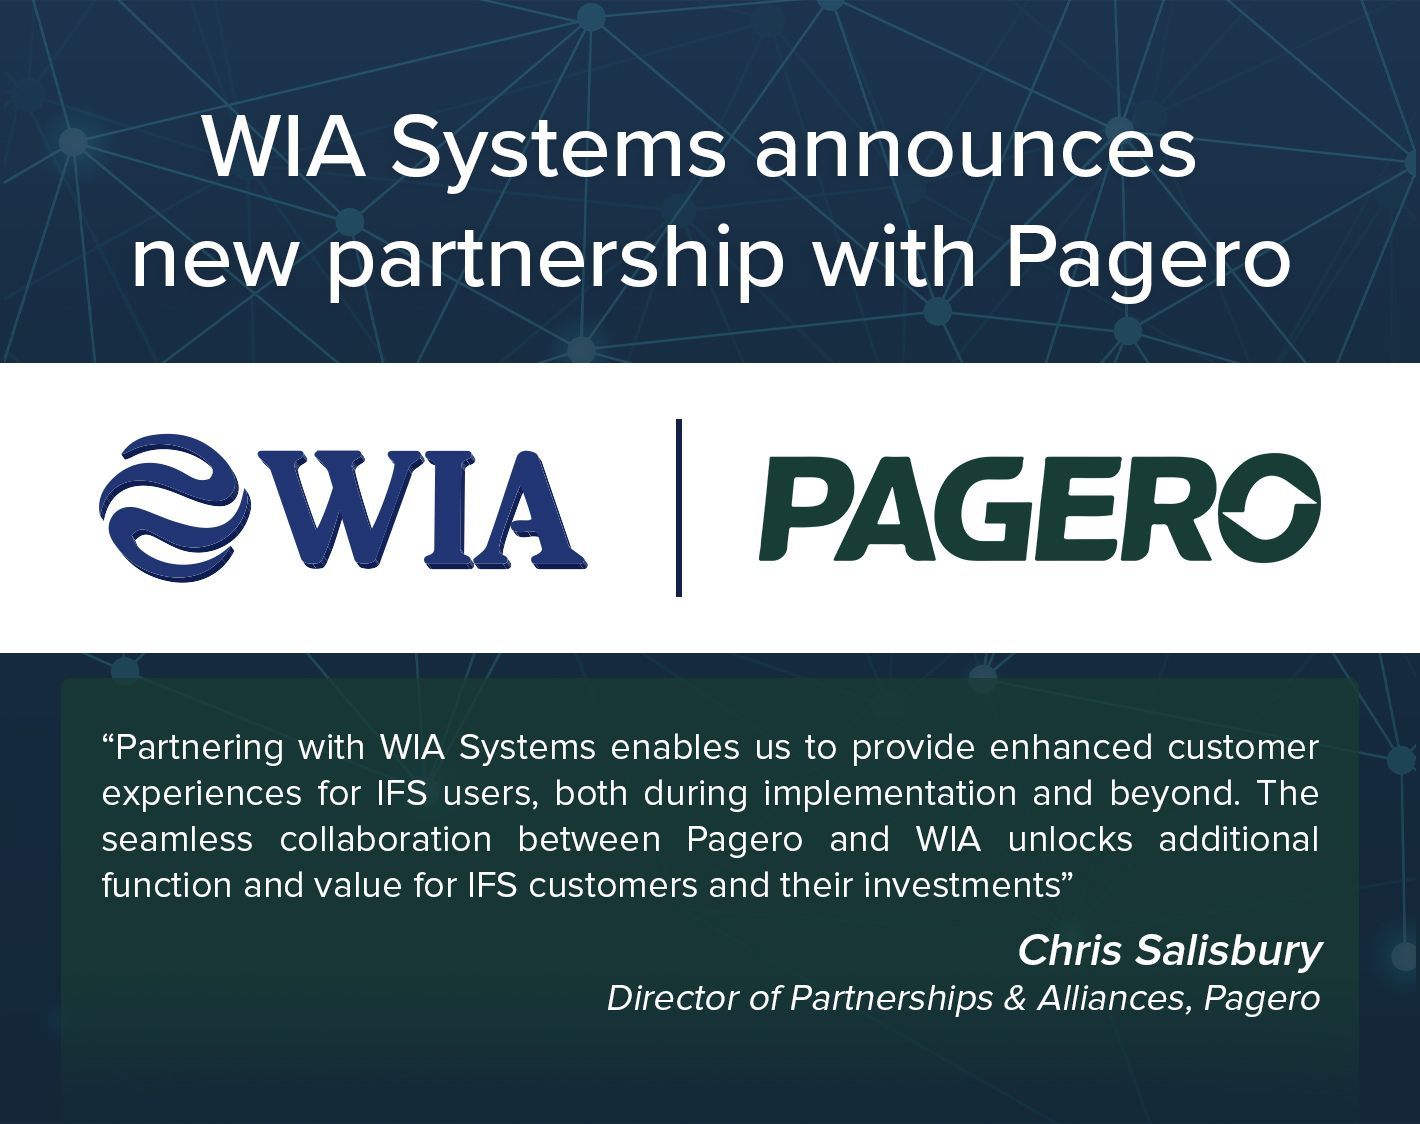 WIA Partnered with Pagero